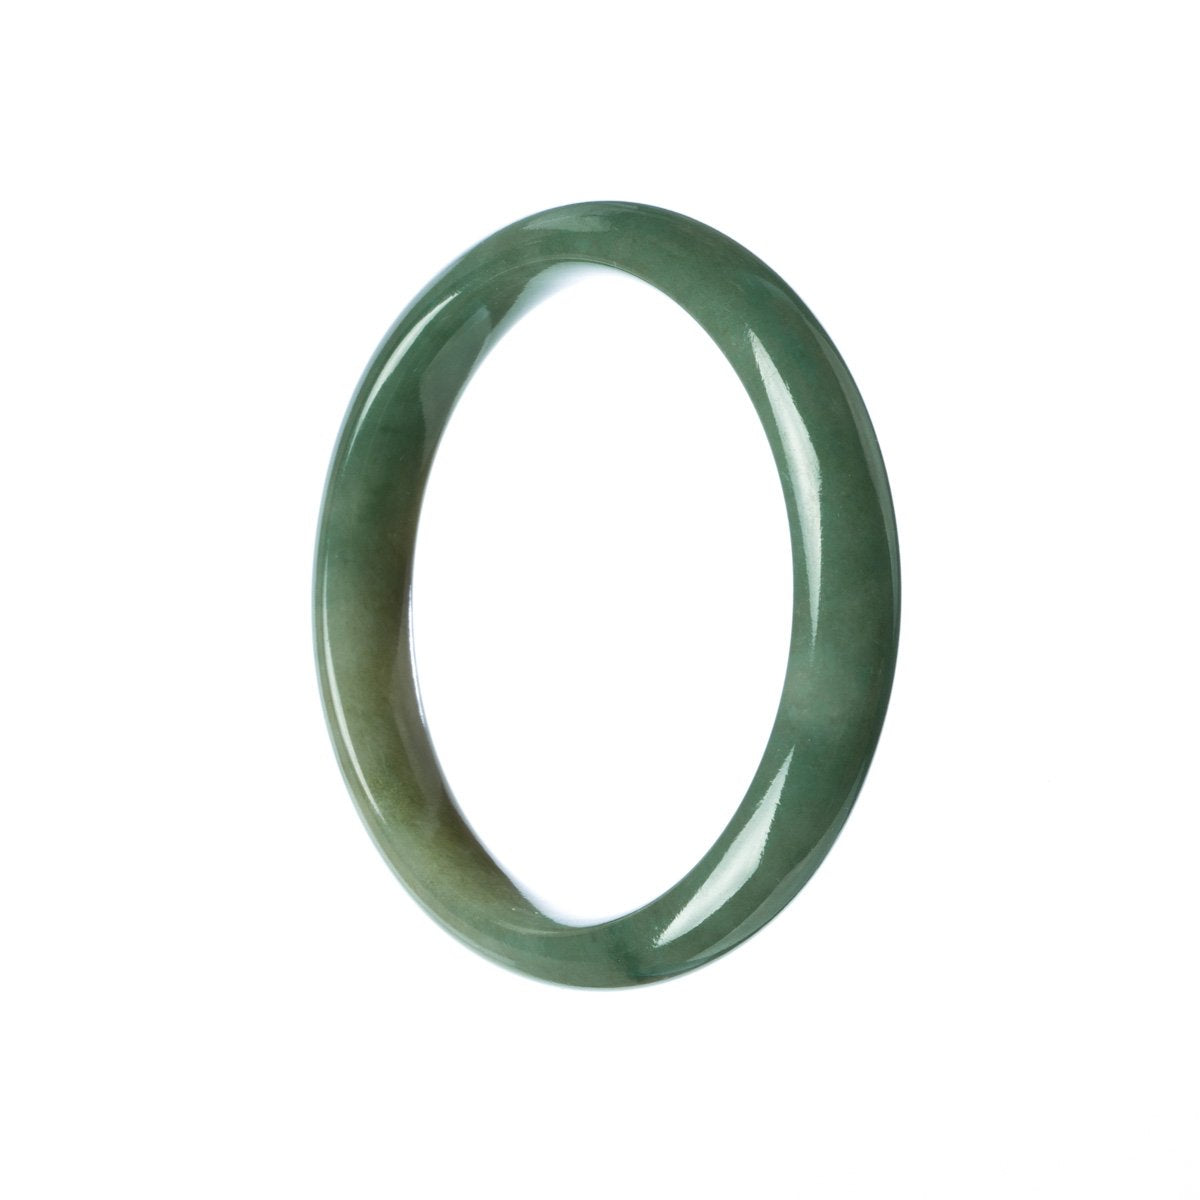 A beautiful half moon-shaped green jadeite bangle with a 57mm diameter, crafted from high-quality Grade A jadeite.